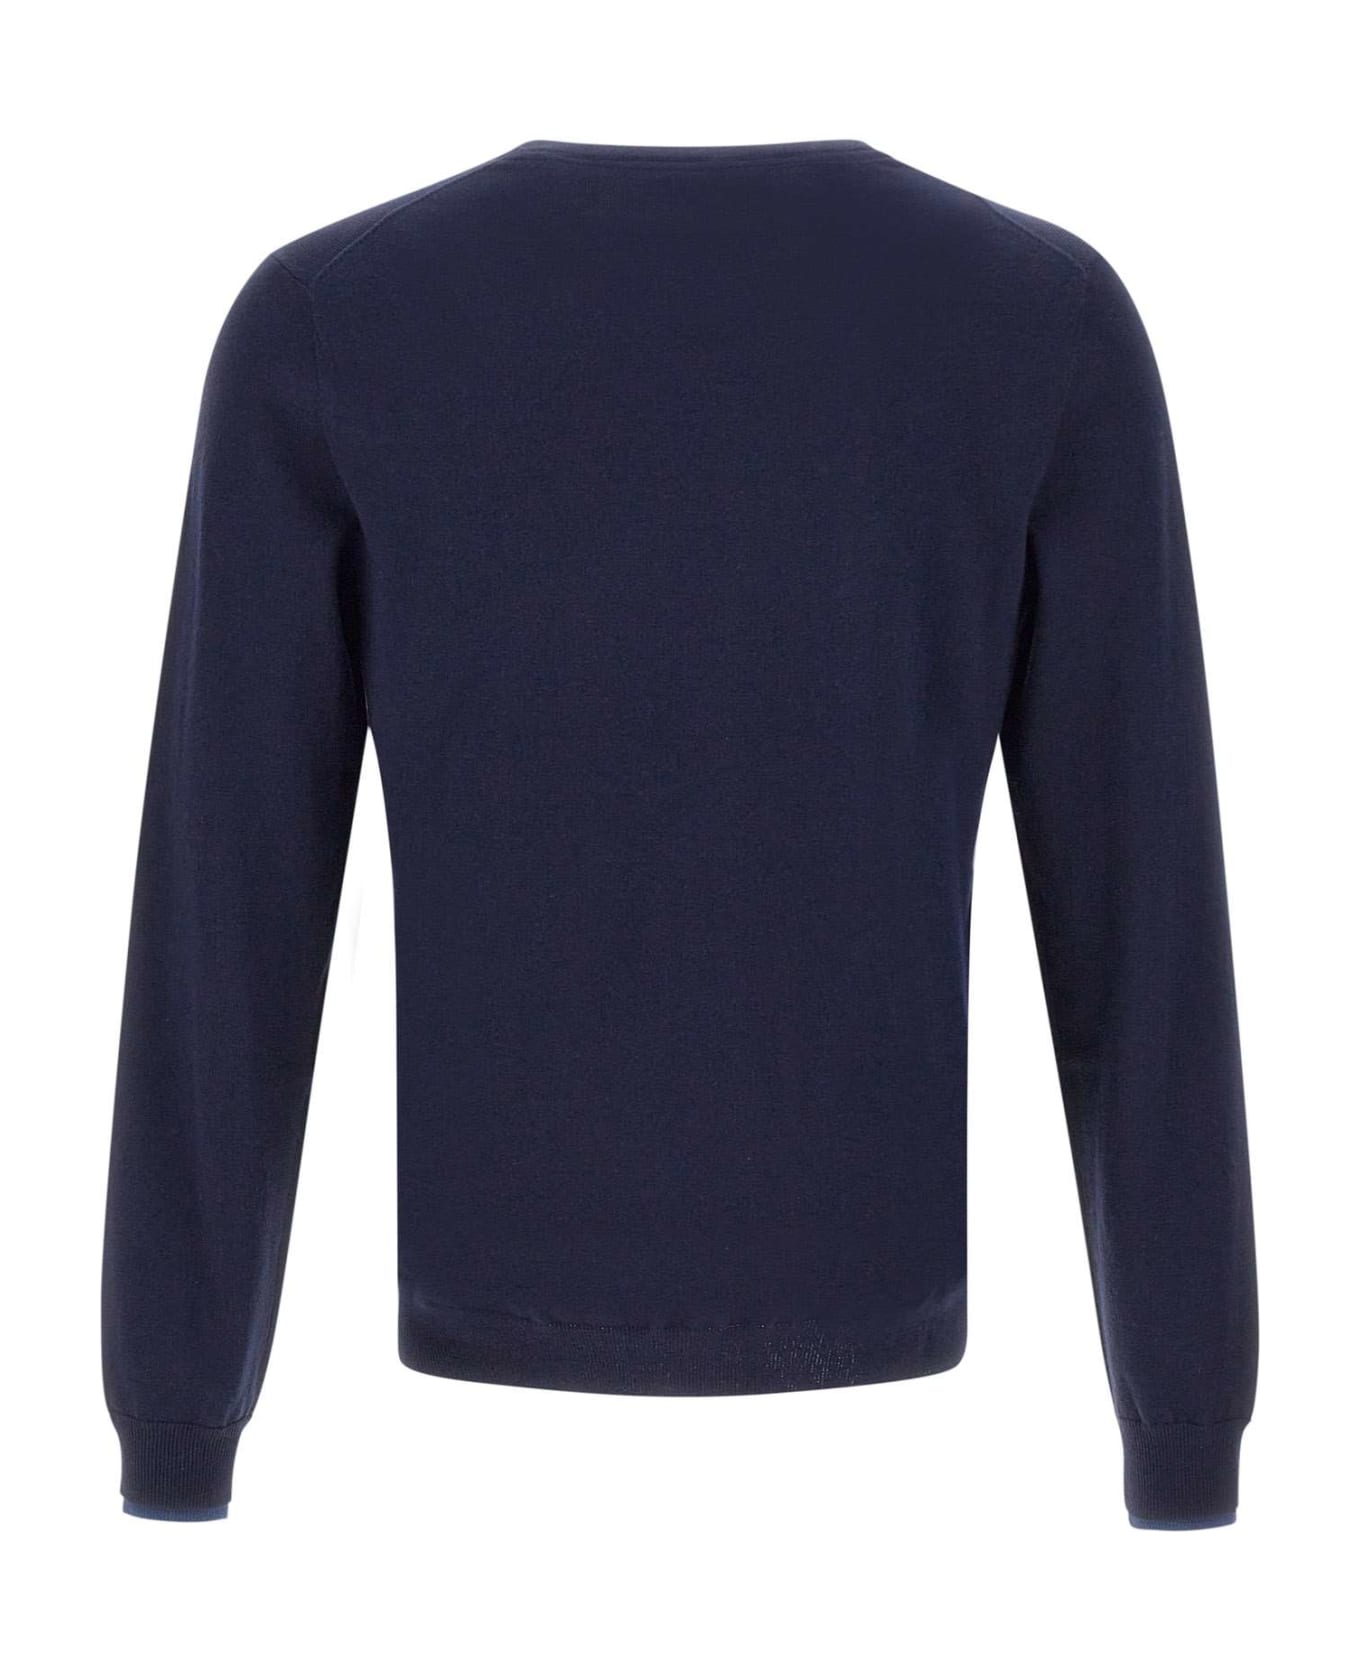 Sun 68 'round Double' Cotton And Wool Pullover Sweater - NAVY BLUE ニットウェア